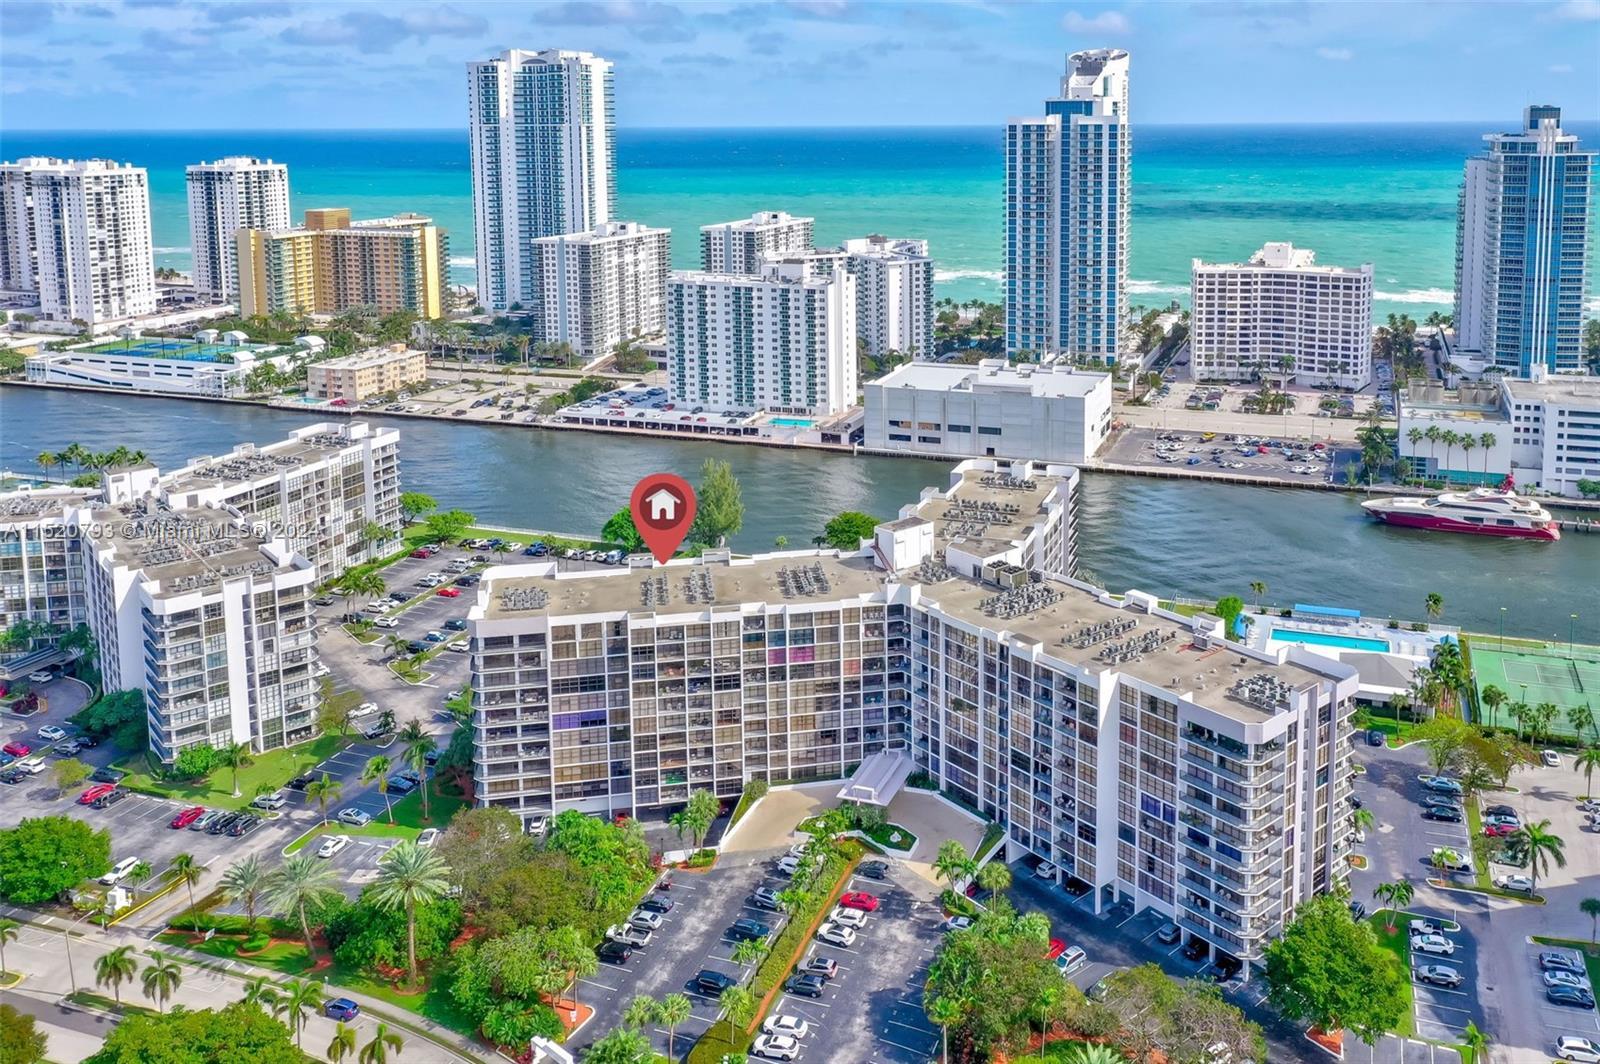 Within Hallandale Beach’s prestigious Three Islands is the perfect blend of comfort, luxury, and sec